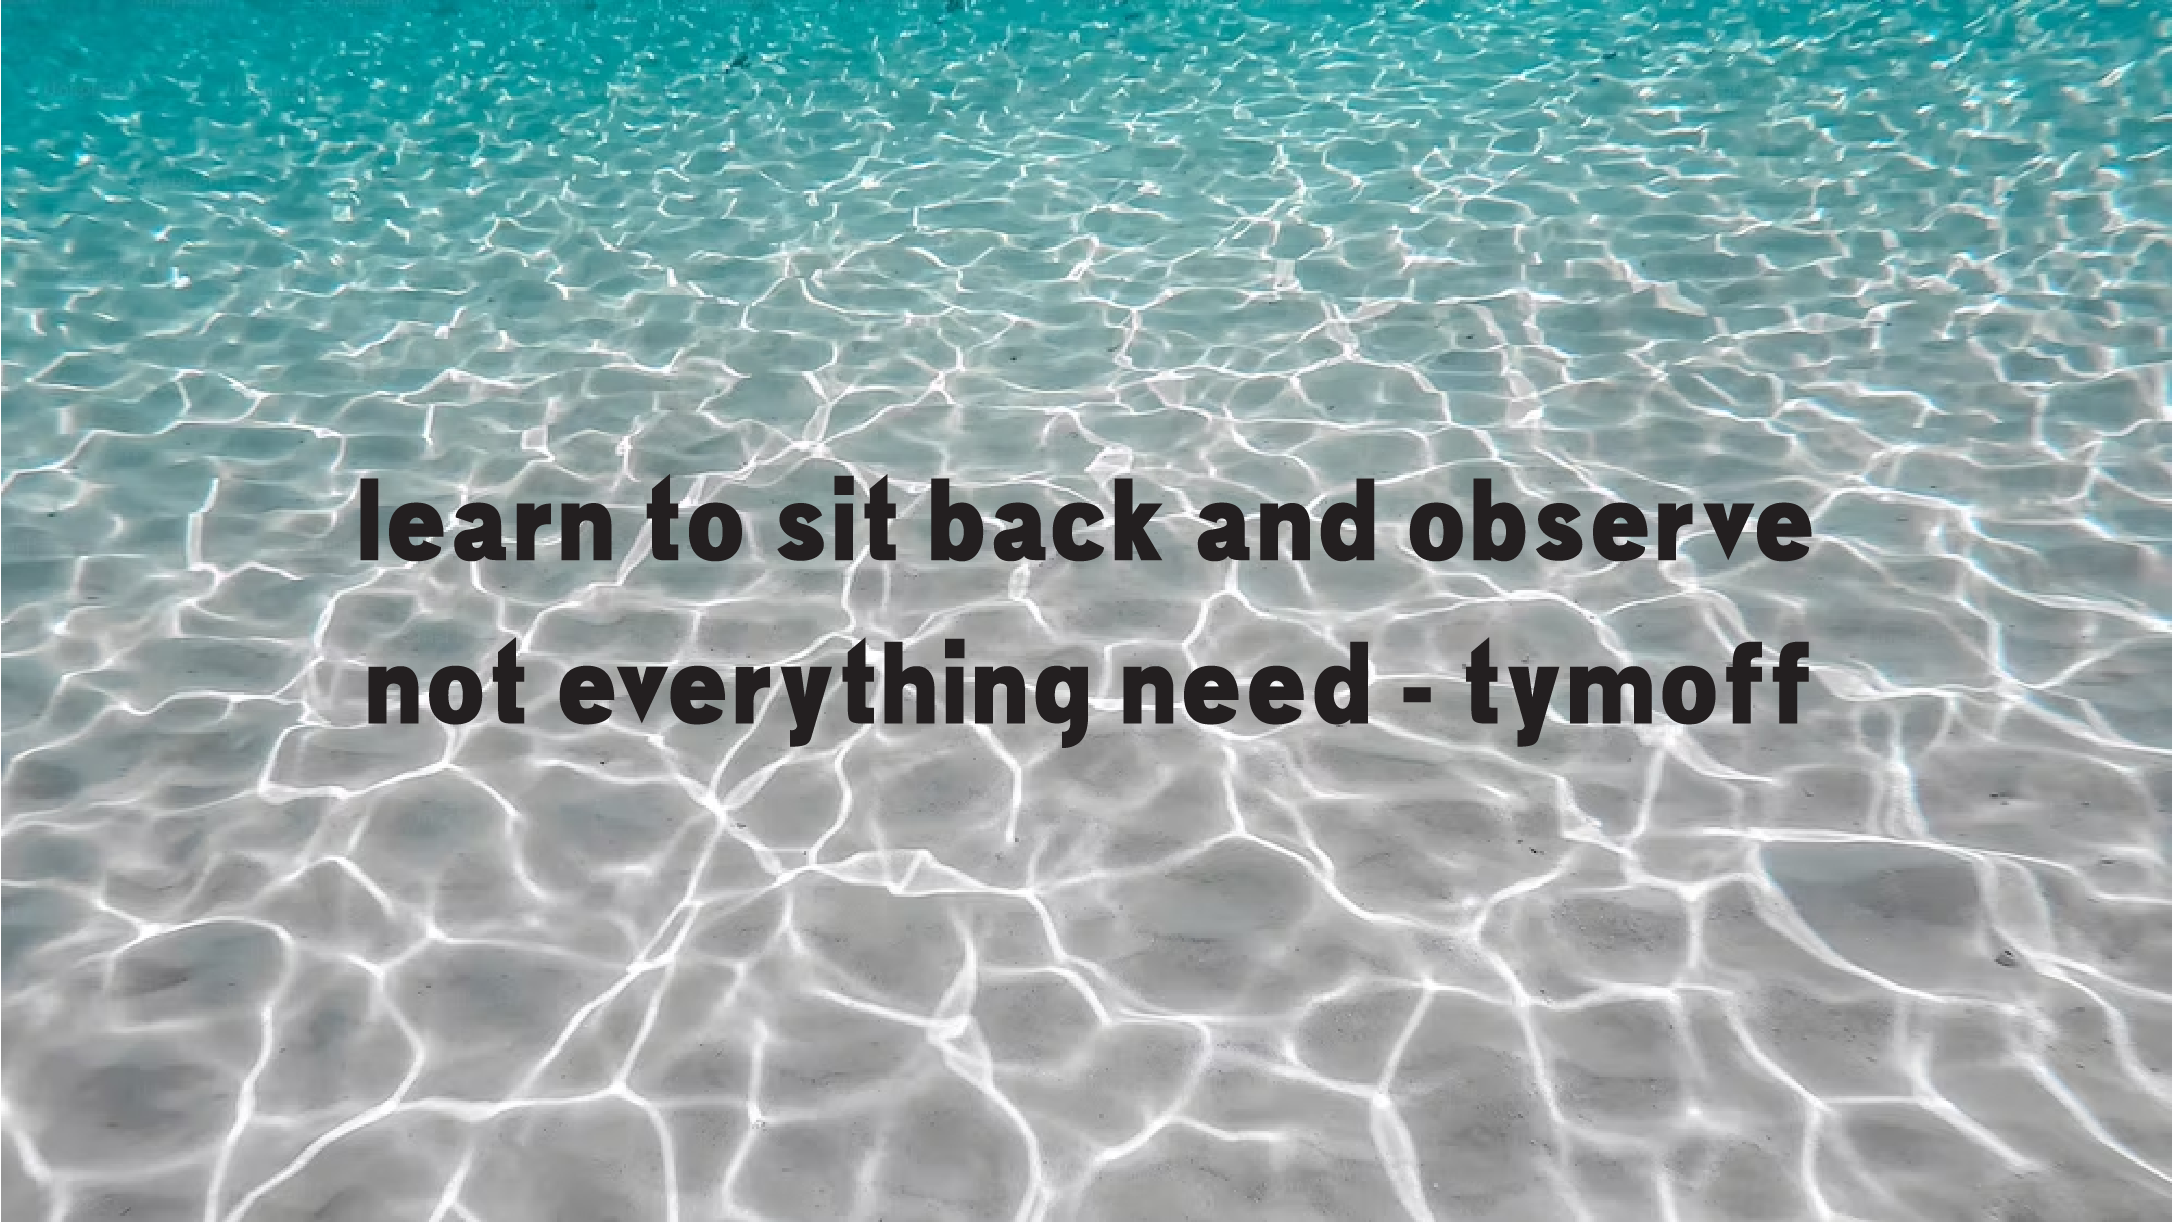 Learn to sit back and observe. not everything need - Tymoff